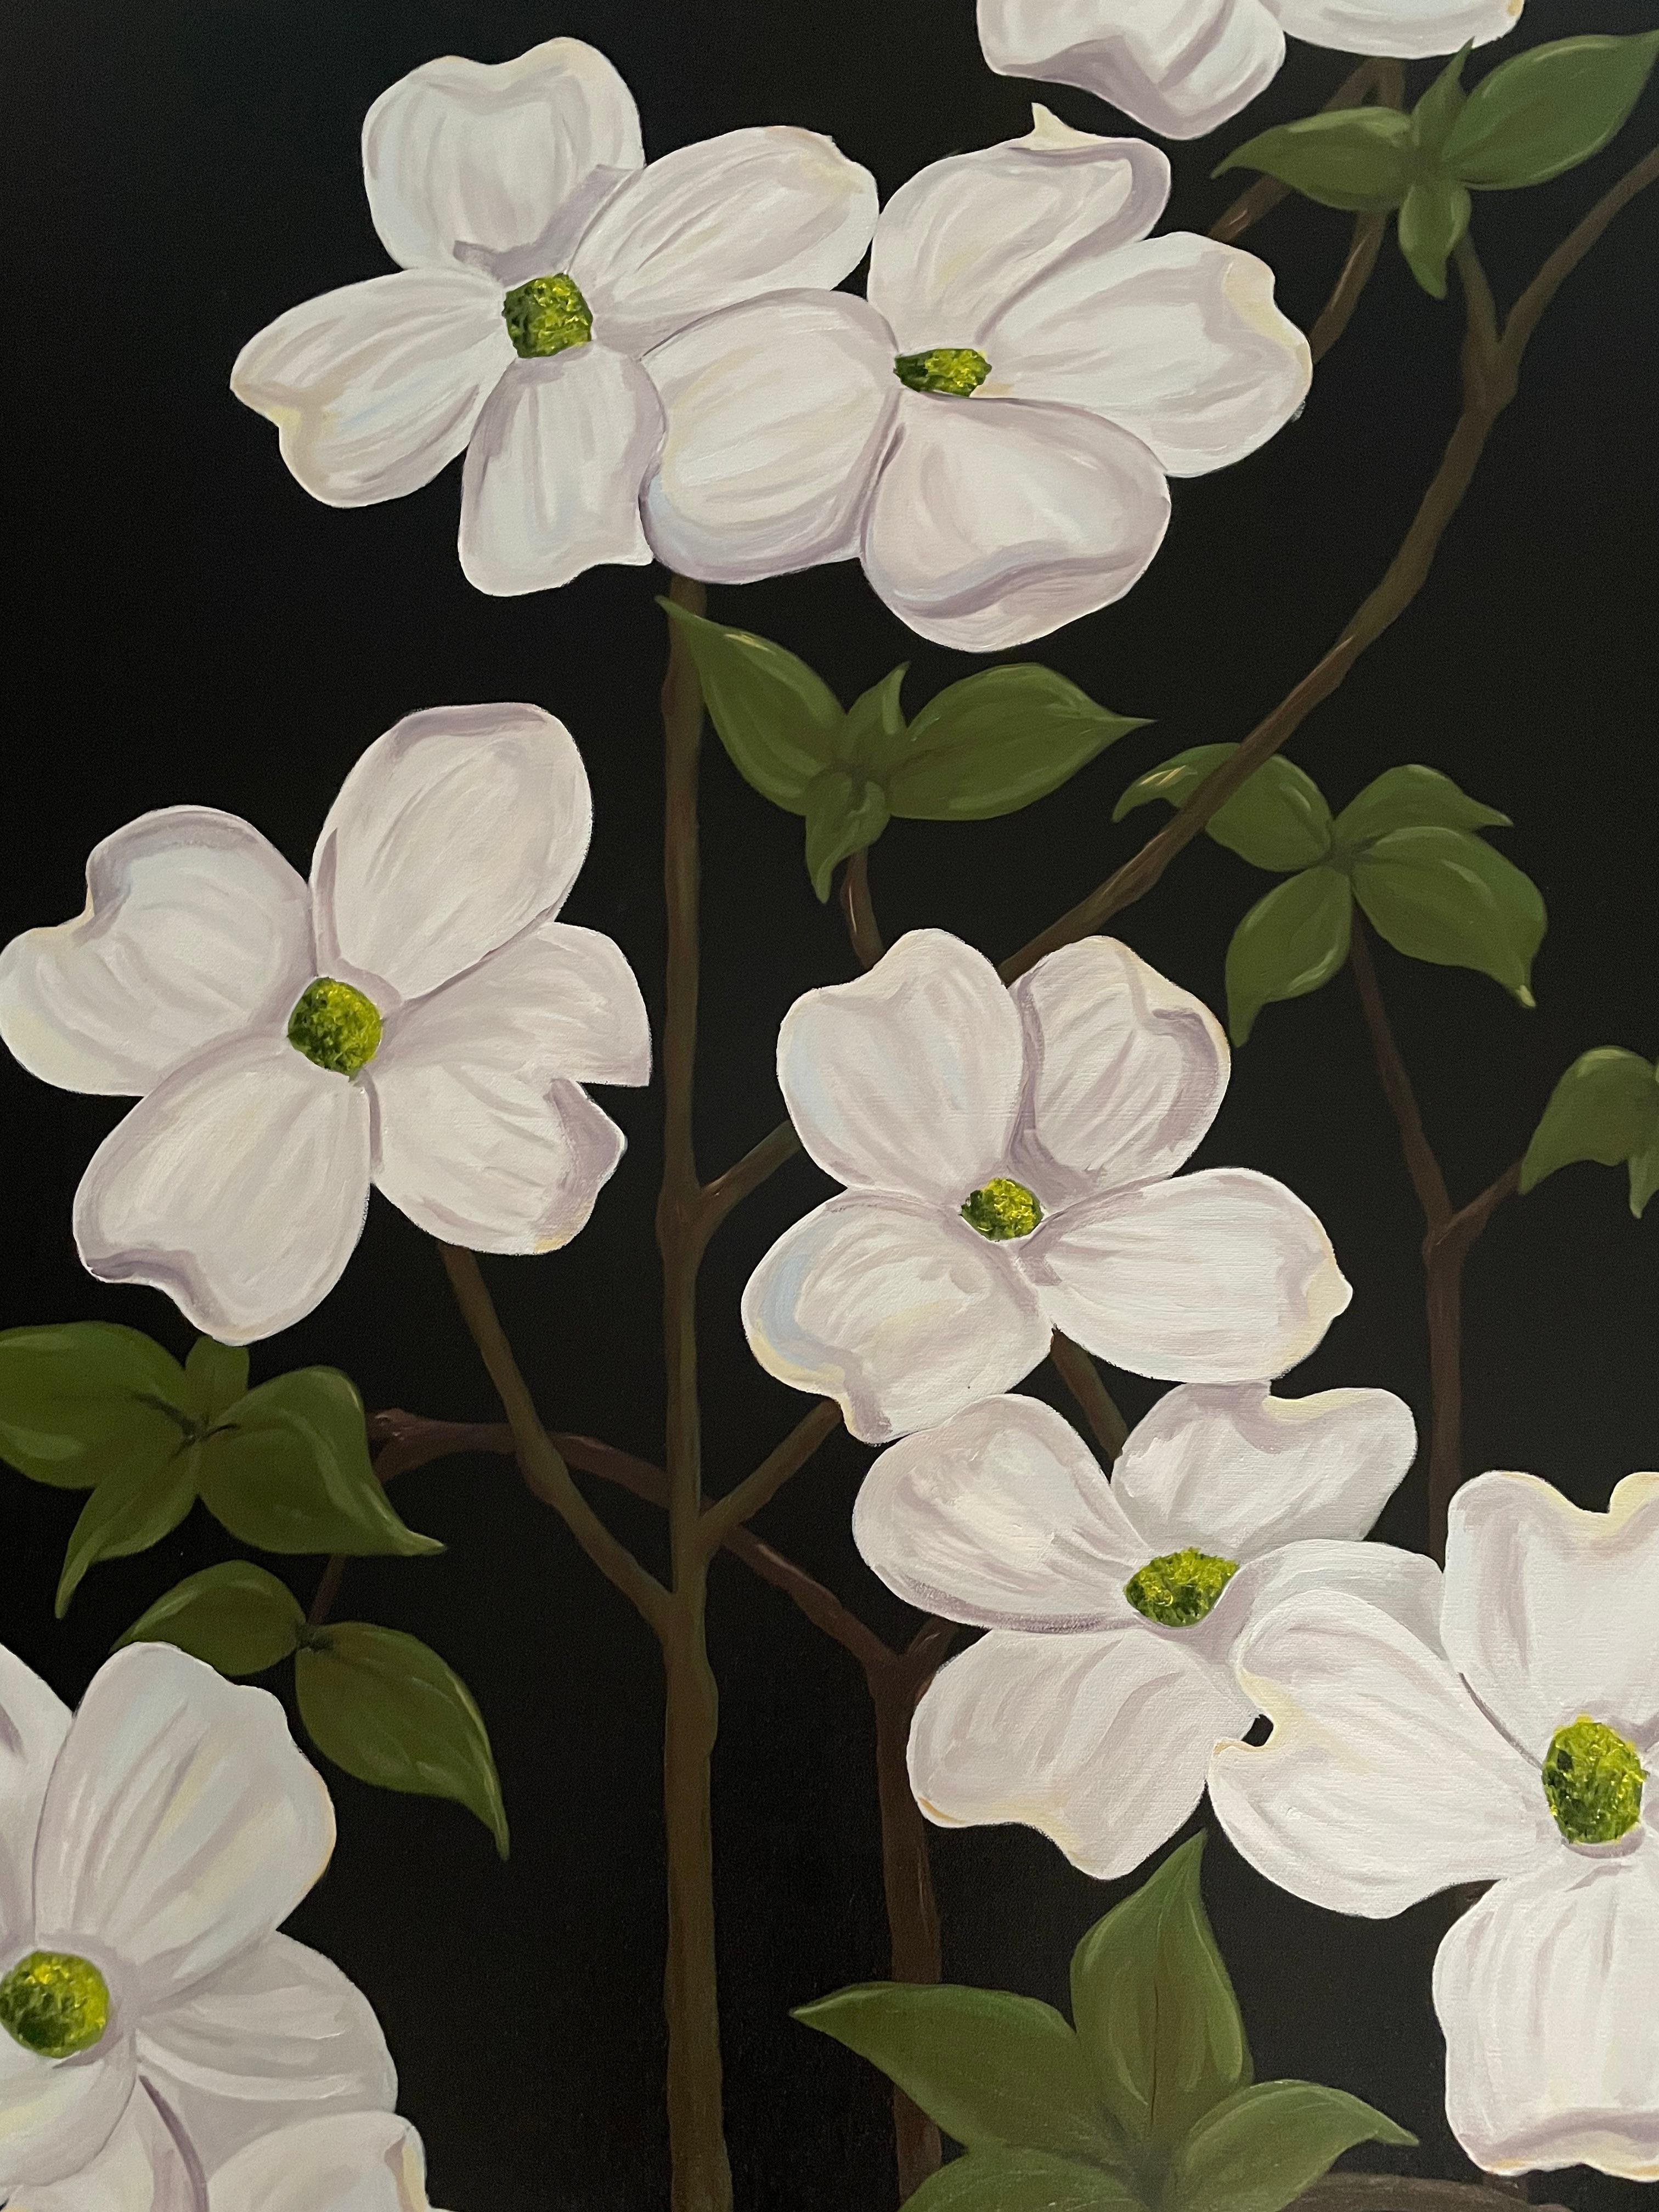 Jubilant White Flowers with Verdant Leaves on Branches. Title - Wild Dogwood - American Realist Painting by Ken Miller